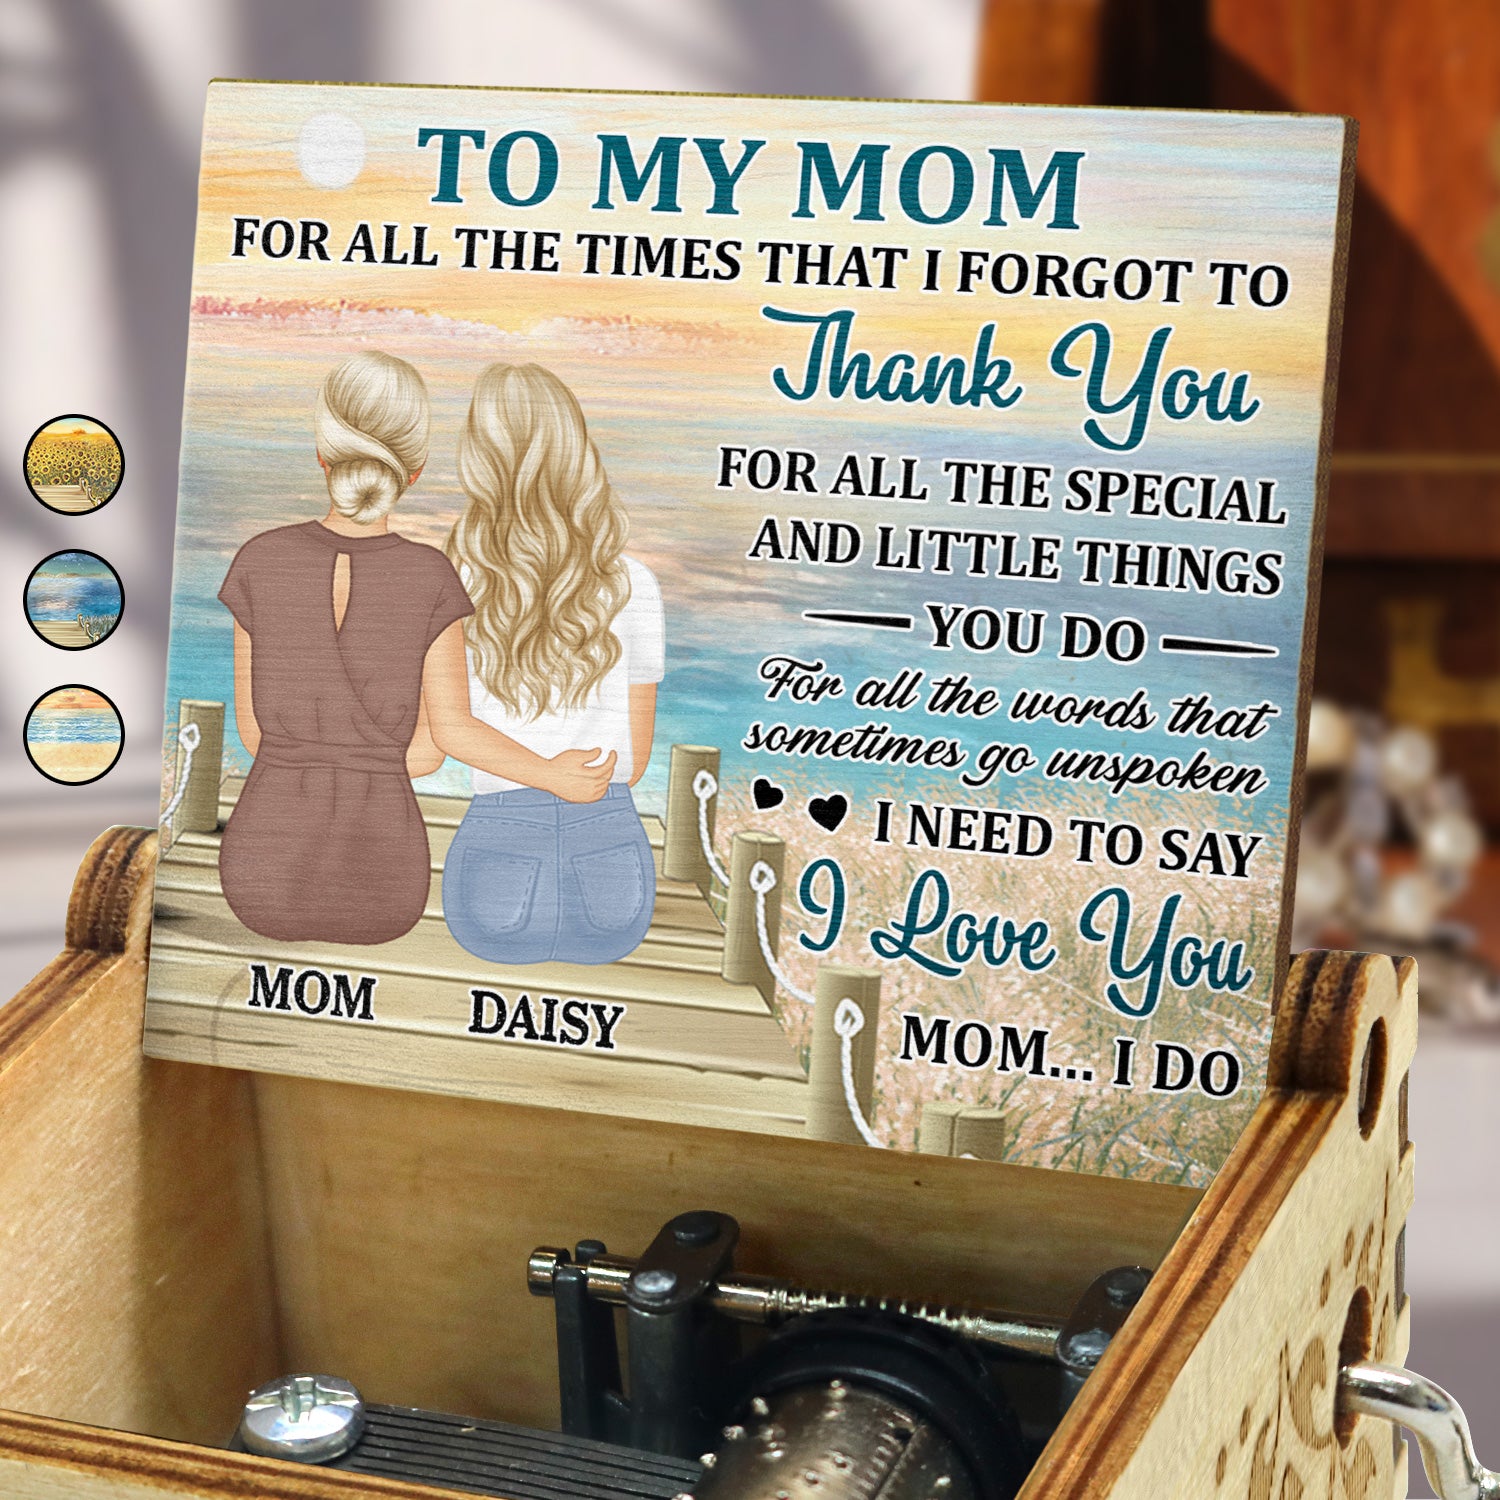 I Need To Say I Love You - Gift For Mother, Grandma, Grandmother - Personalized Spin Button, Hand Crank Music Box